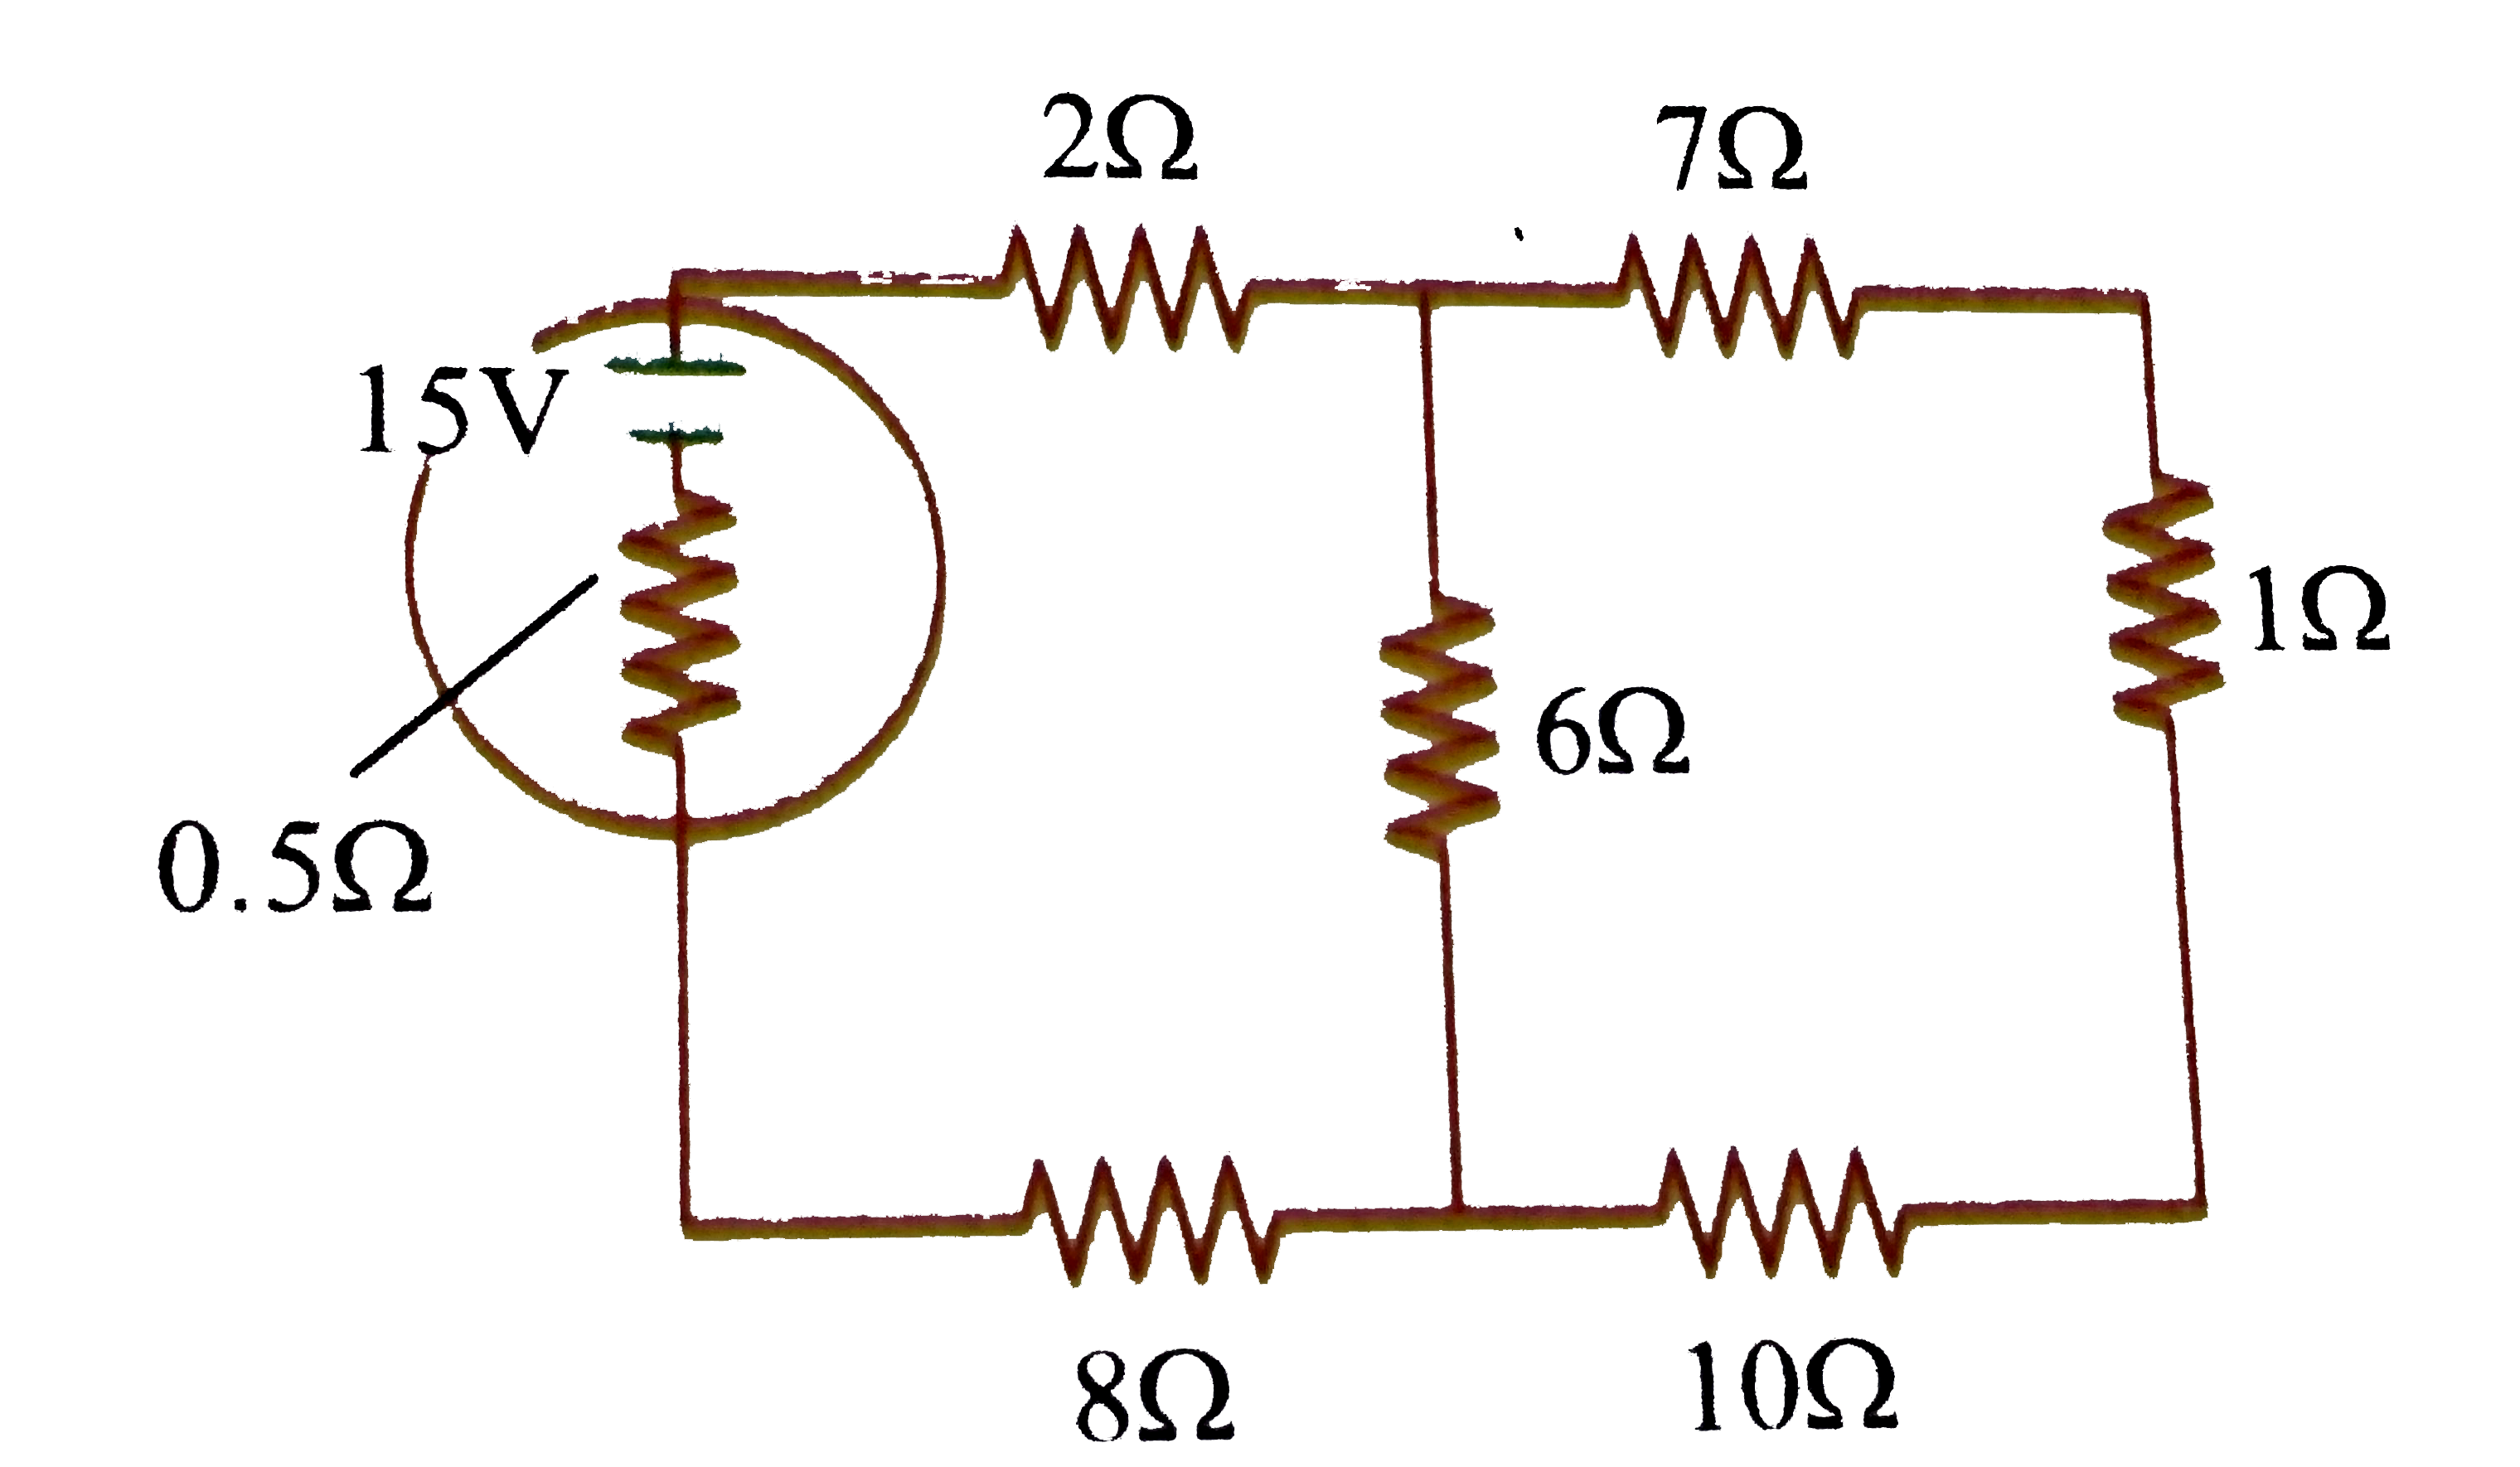 The emf of a cell E is 15 V as shown in the figure with an internal resistance of 0.5Omega. Then the value of the current drawn from the cell is